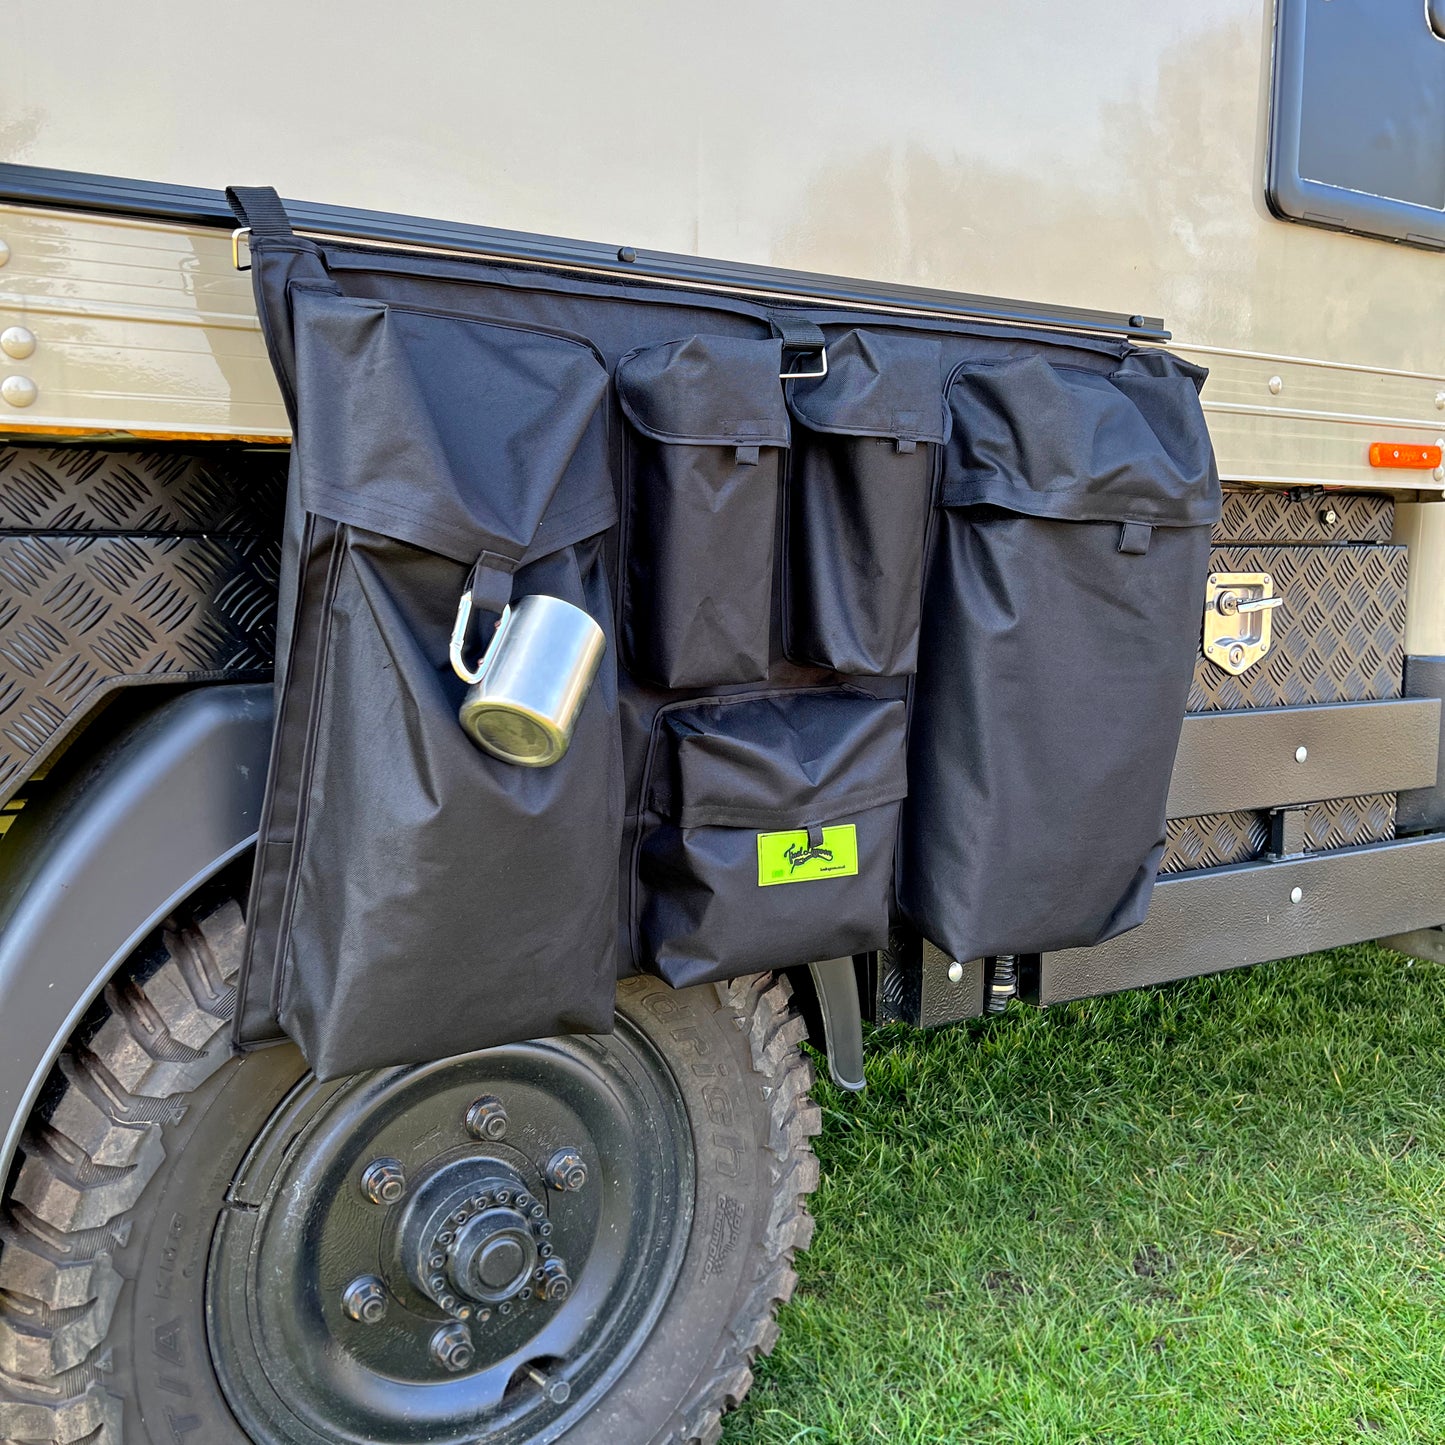 Multi Way Storage Organisers - The Expedition